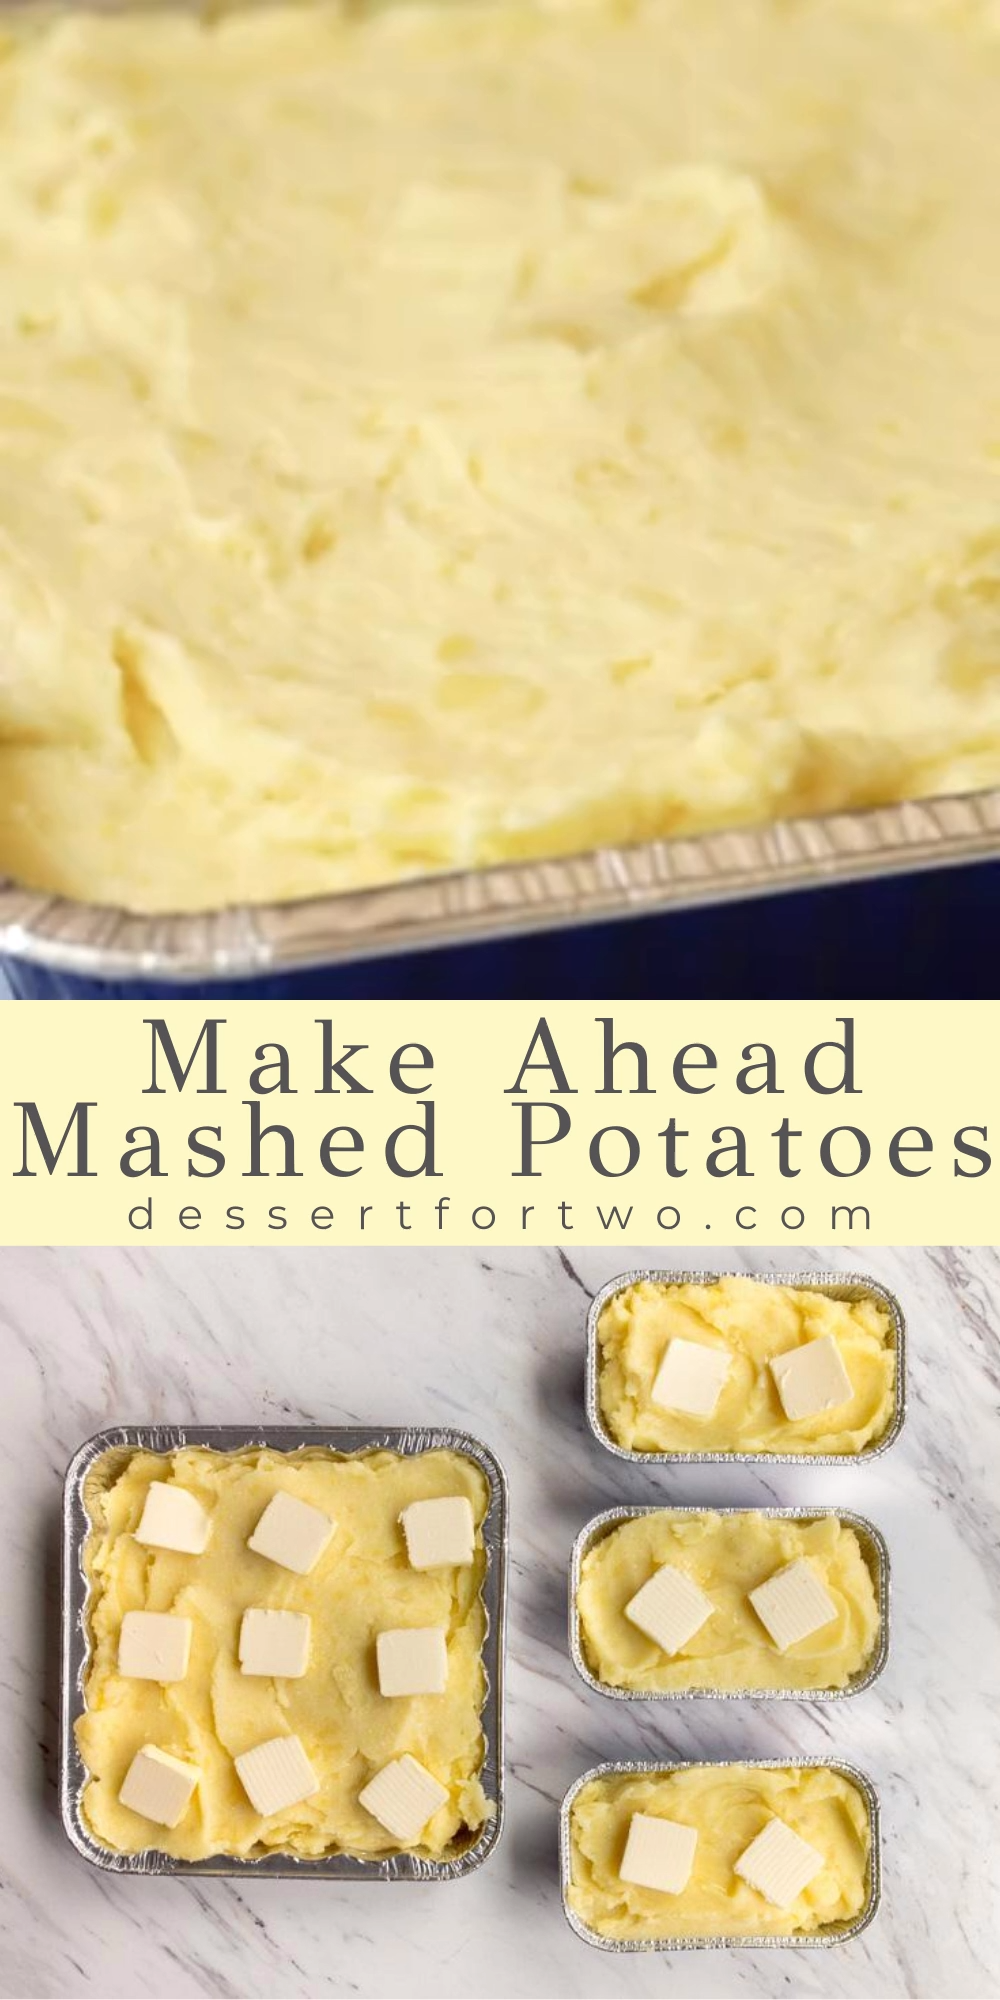 Make Ahead Homemade Mashed Potatoes for Two Small Batch -   25 thanksgiving desserts for a crowd videos ideas